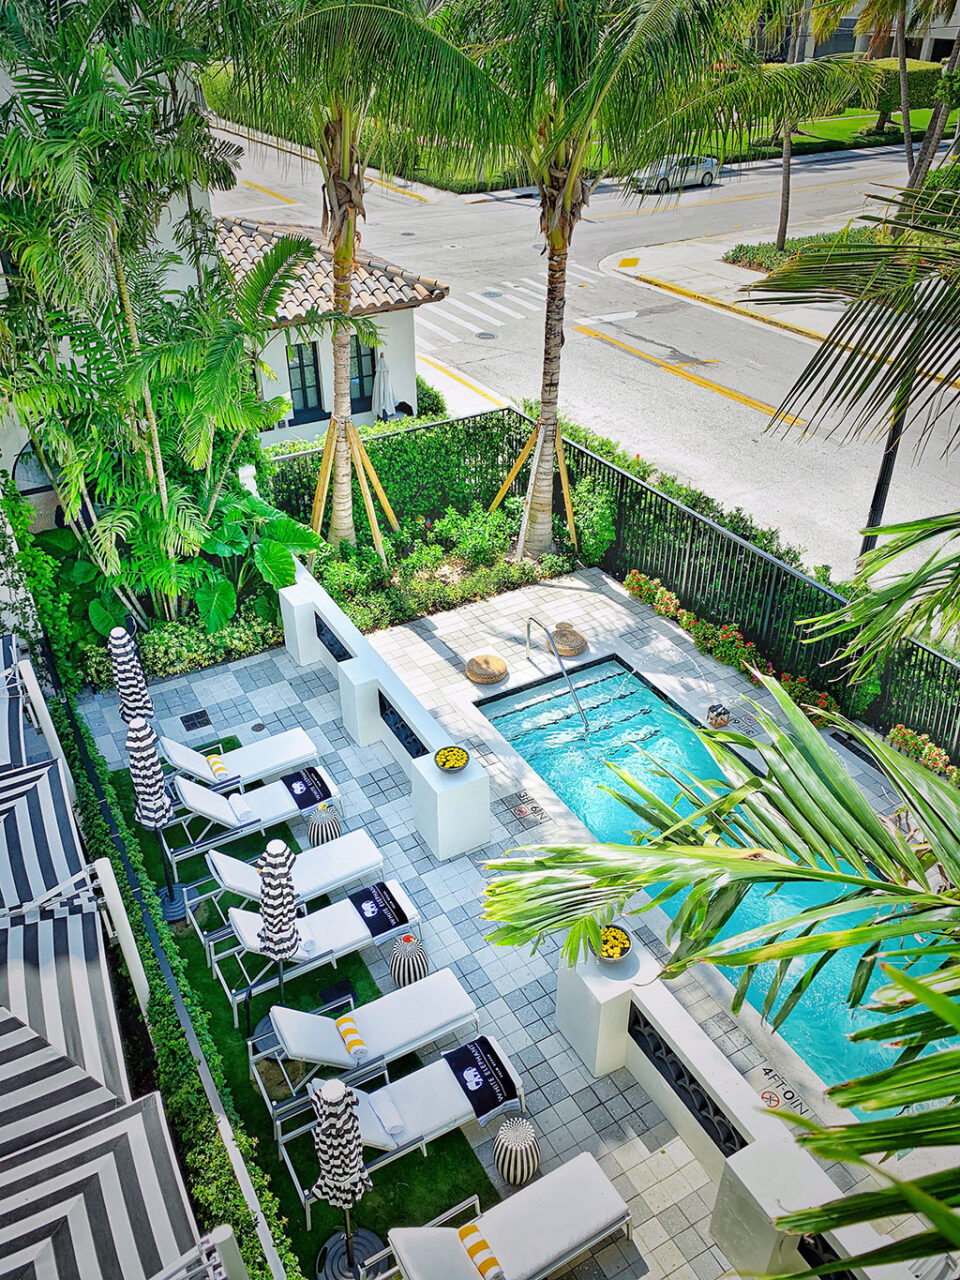 In order to preserve the original low wing walls that were the front boundary of the hotel, the central courtyard was enlarged to extend beyond its original footprint with a new outdoor pool located at the front of the hotel. Designers added to the original landscaping, making the courtyard greener and more lush and activating it with poolside lounging and outdoor dining. Photo Credit: © Chi-Thien Nguyen/Elkus Manfredi Architects